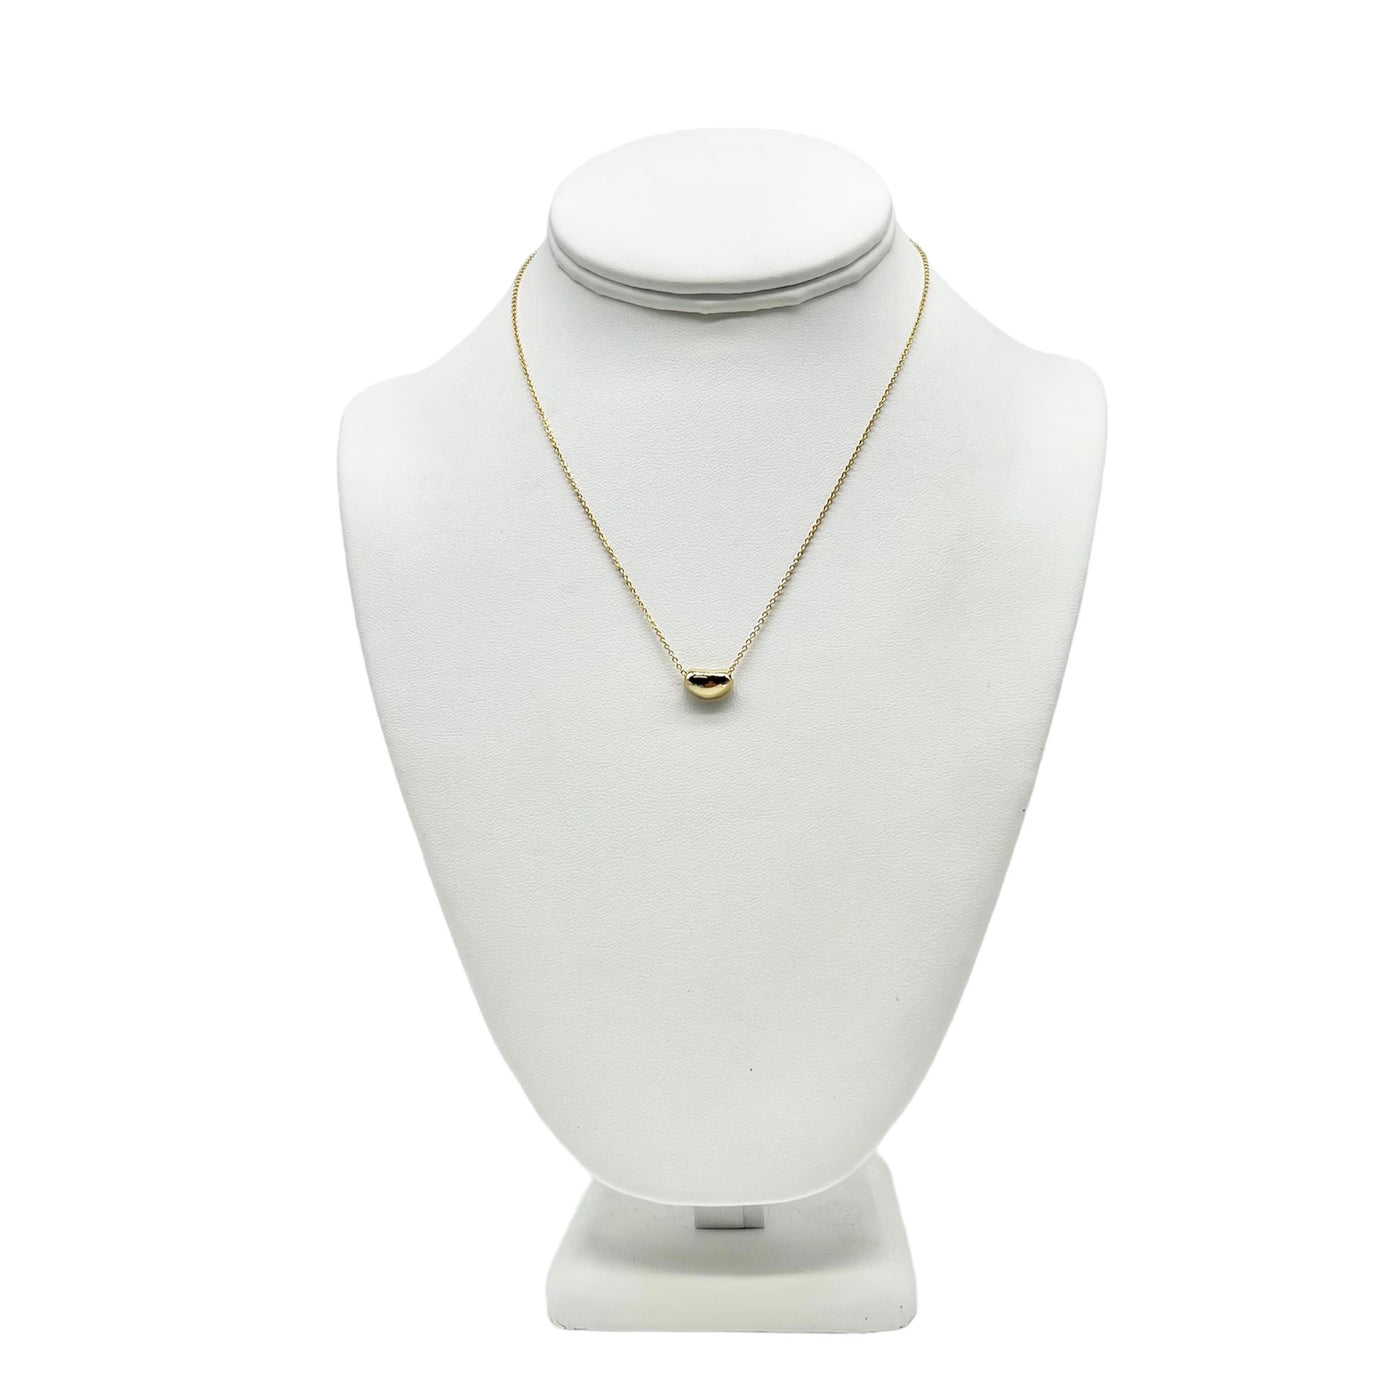 Smooth Finish Bead Pendant Chain Link Necklace